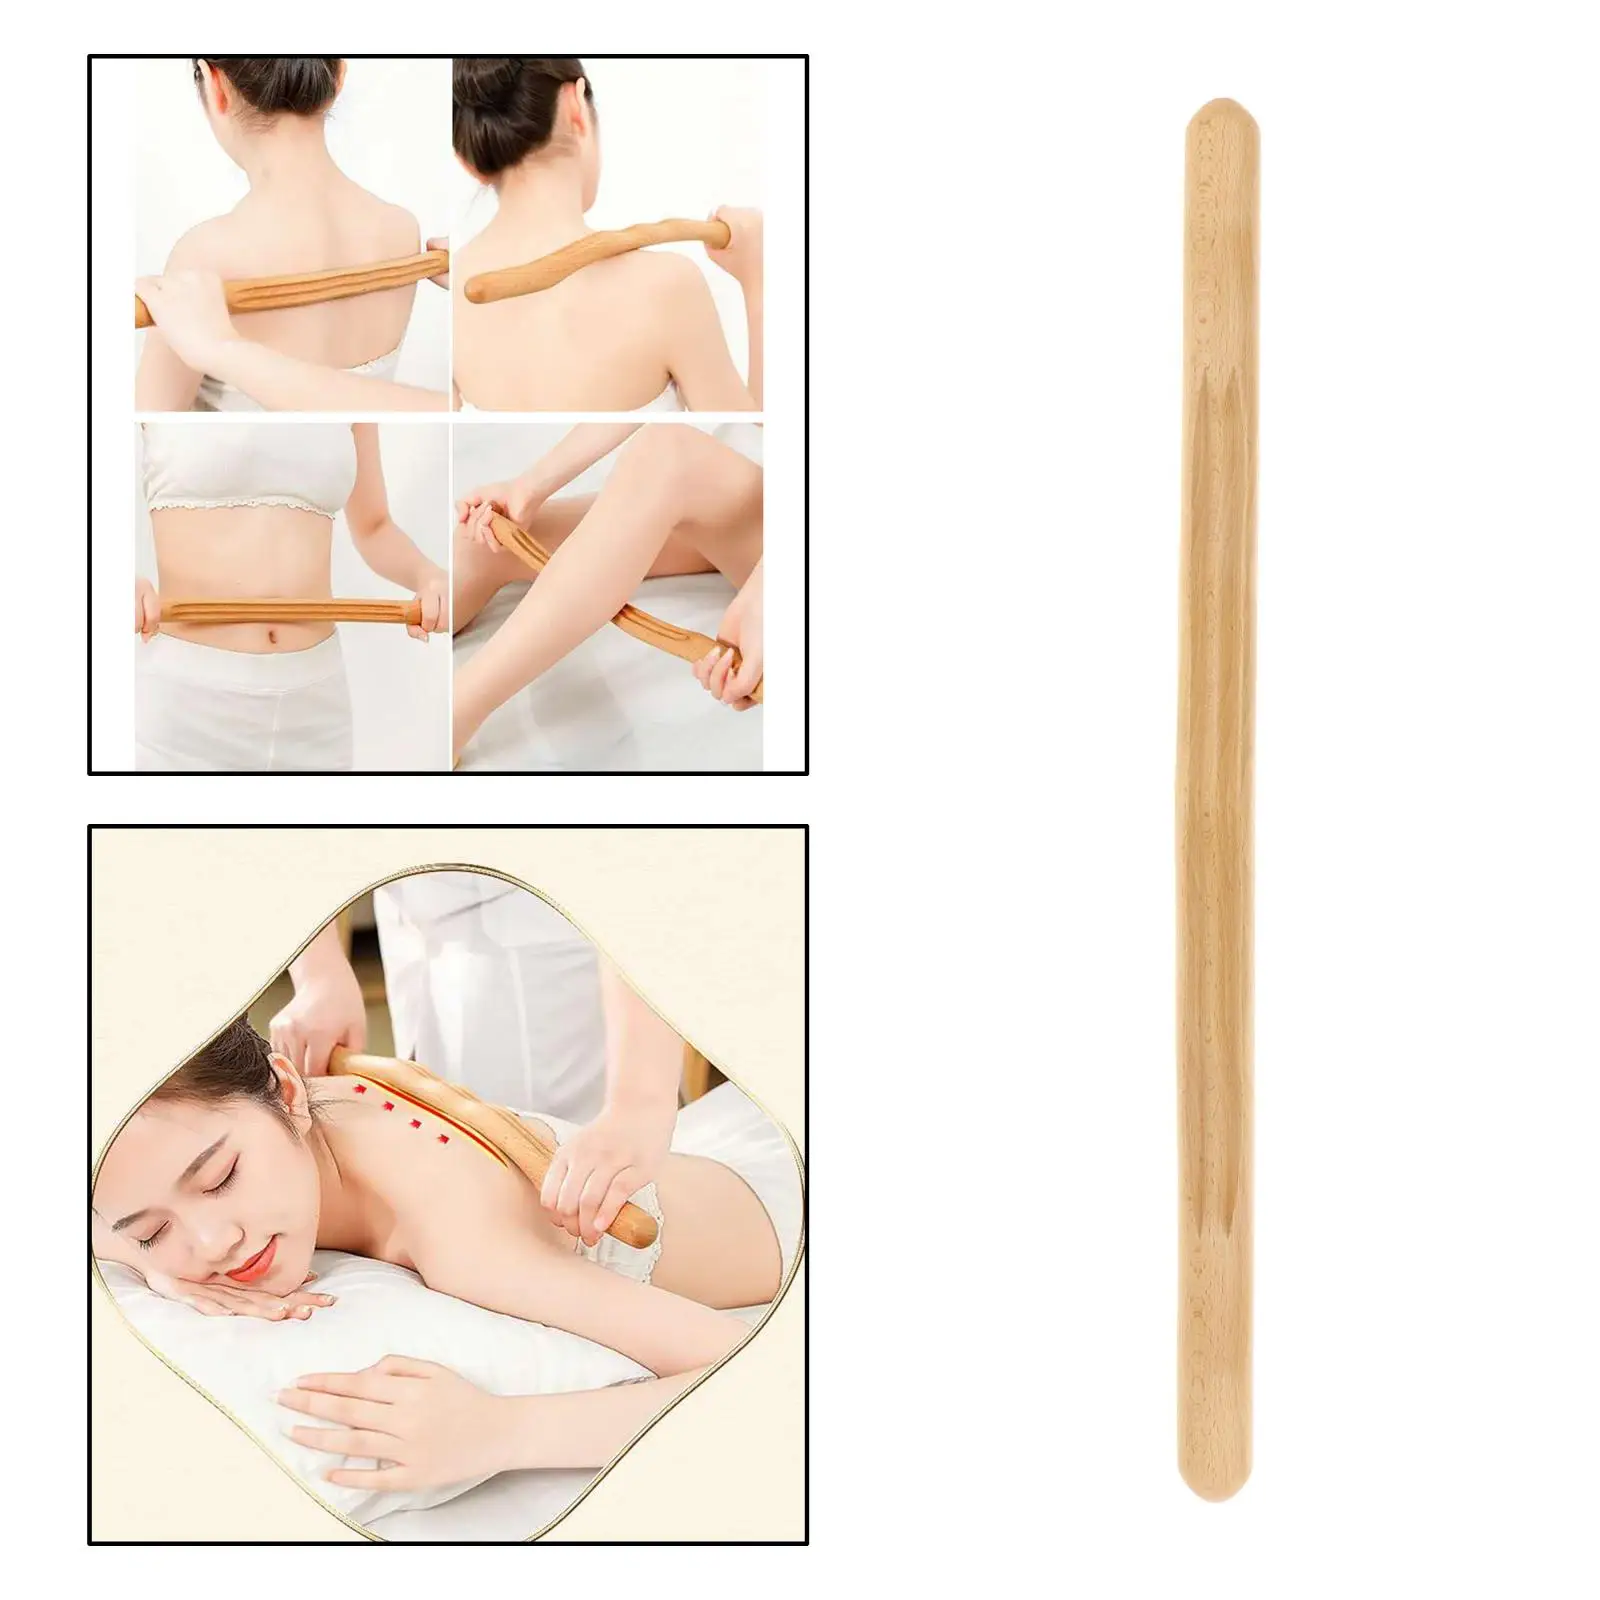 

Body Massage Stick Tool Wood Guasha, Gua Sha Therapeutic Trigger Points and Myofascial Release, Pain-Relief, Sore Muscles